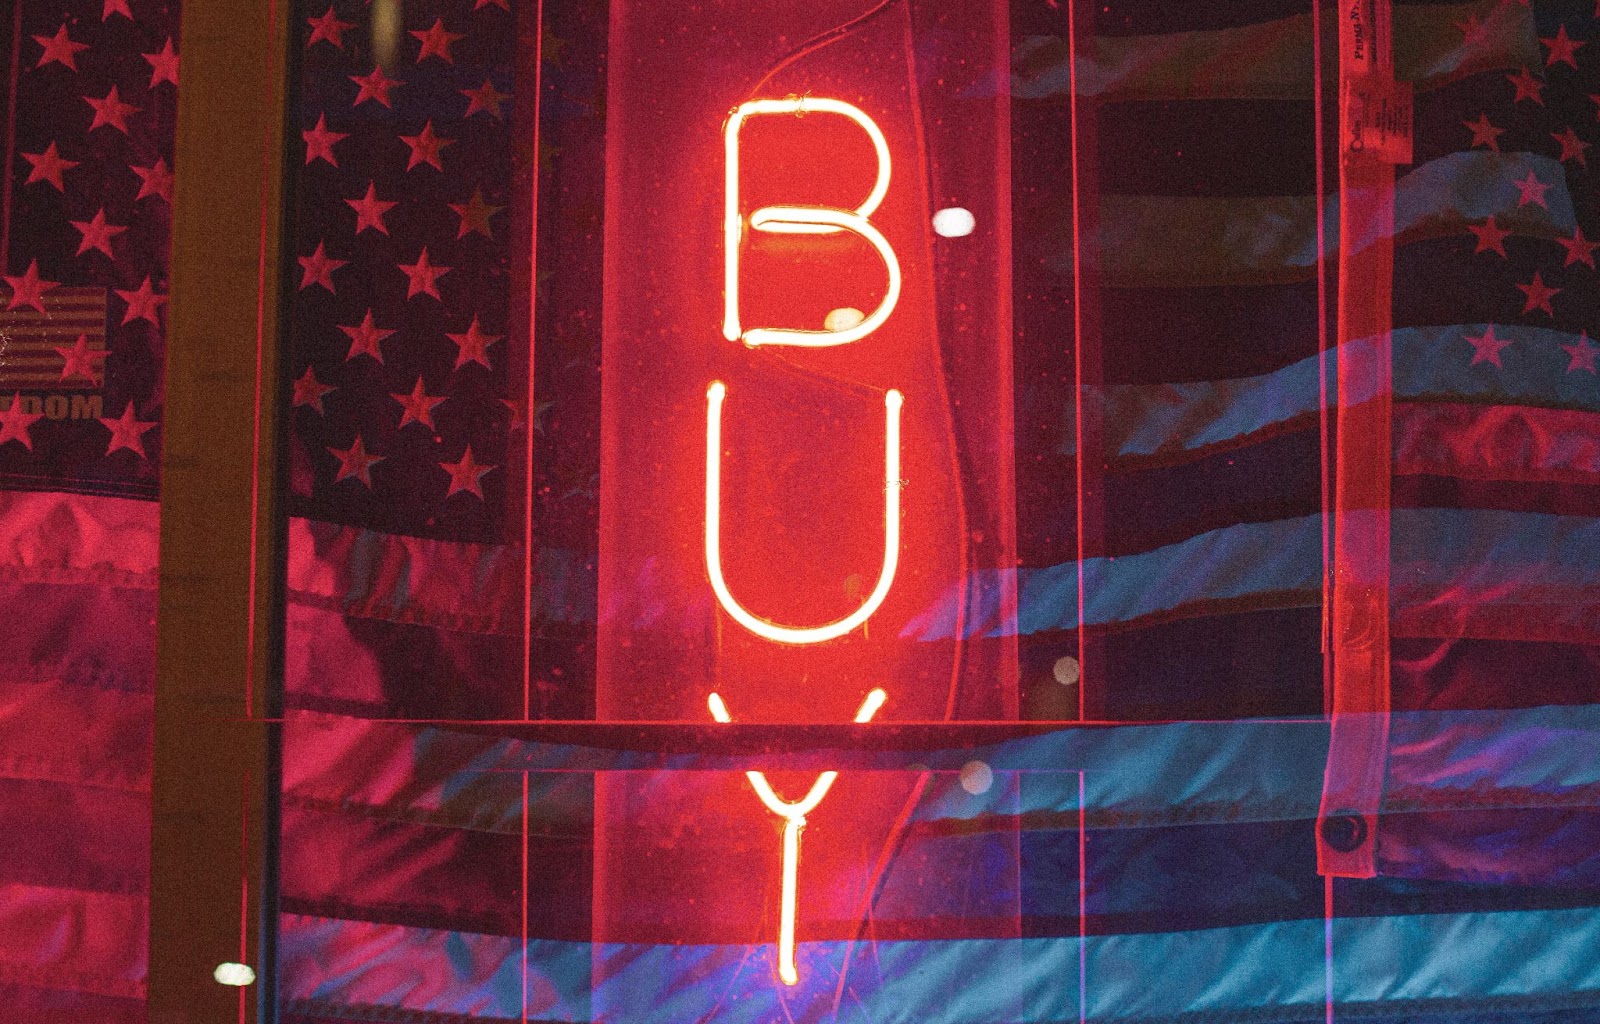 A red neon sign with the word BUY displayed vertically against an American flag.